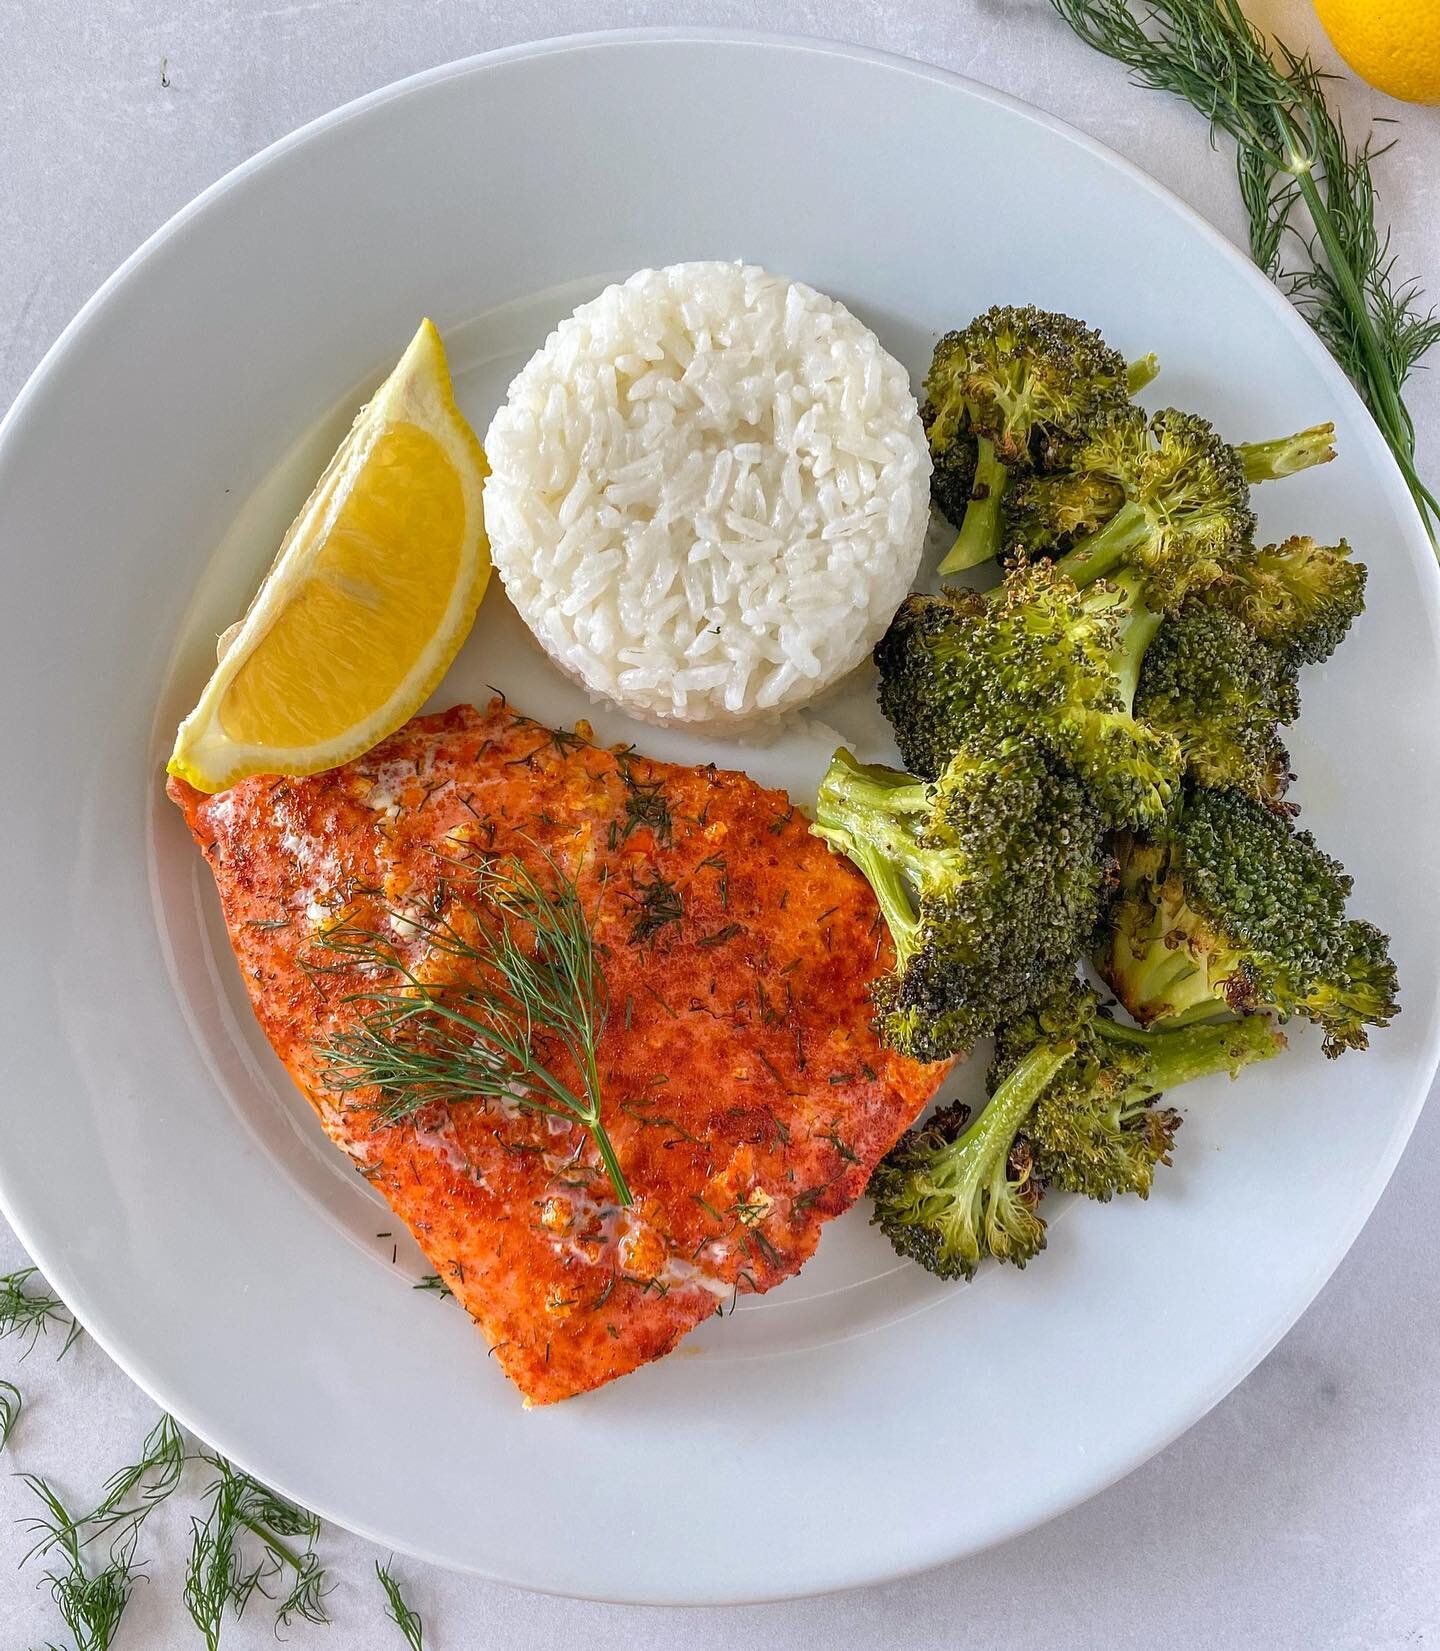 Strong Fish💪🏼🐟 DaniMade, recipe by Harrison, age 9.⁠⁠
⁠⁠
⭐If you love spice, then adding paprika to a simple salmon recipe is a great easy way to give it a little kick of something. This recipe was created by Harrison, age 9. He calls this spicy s